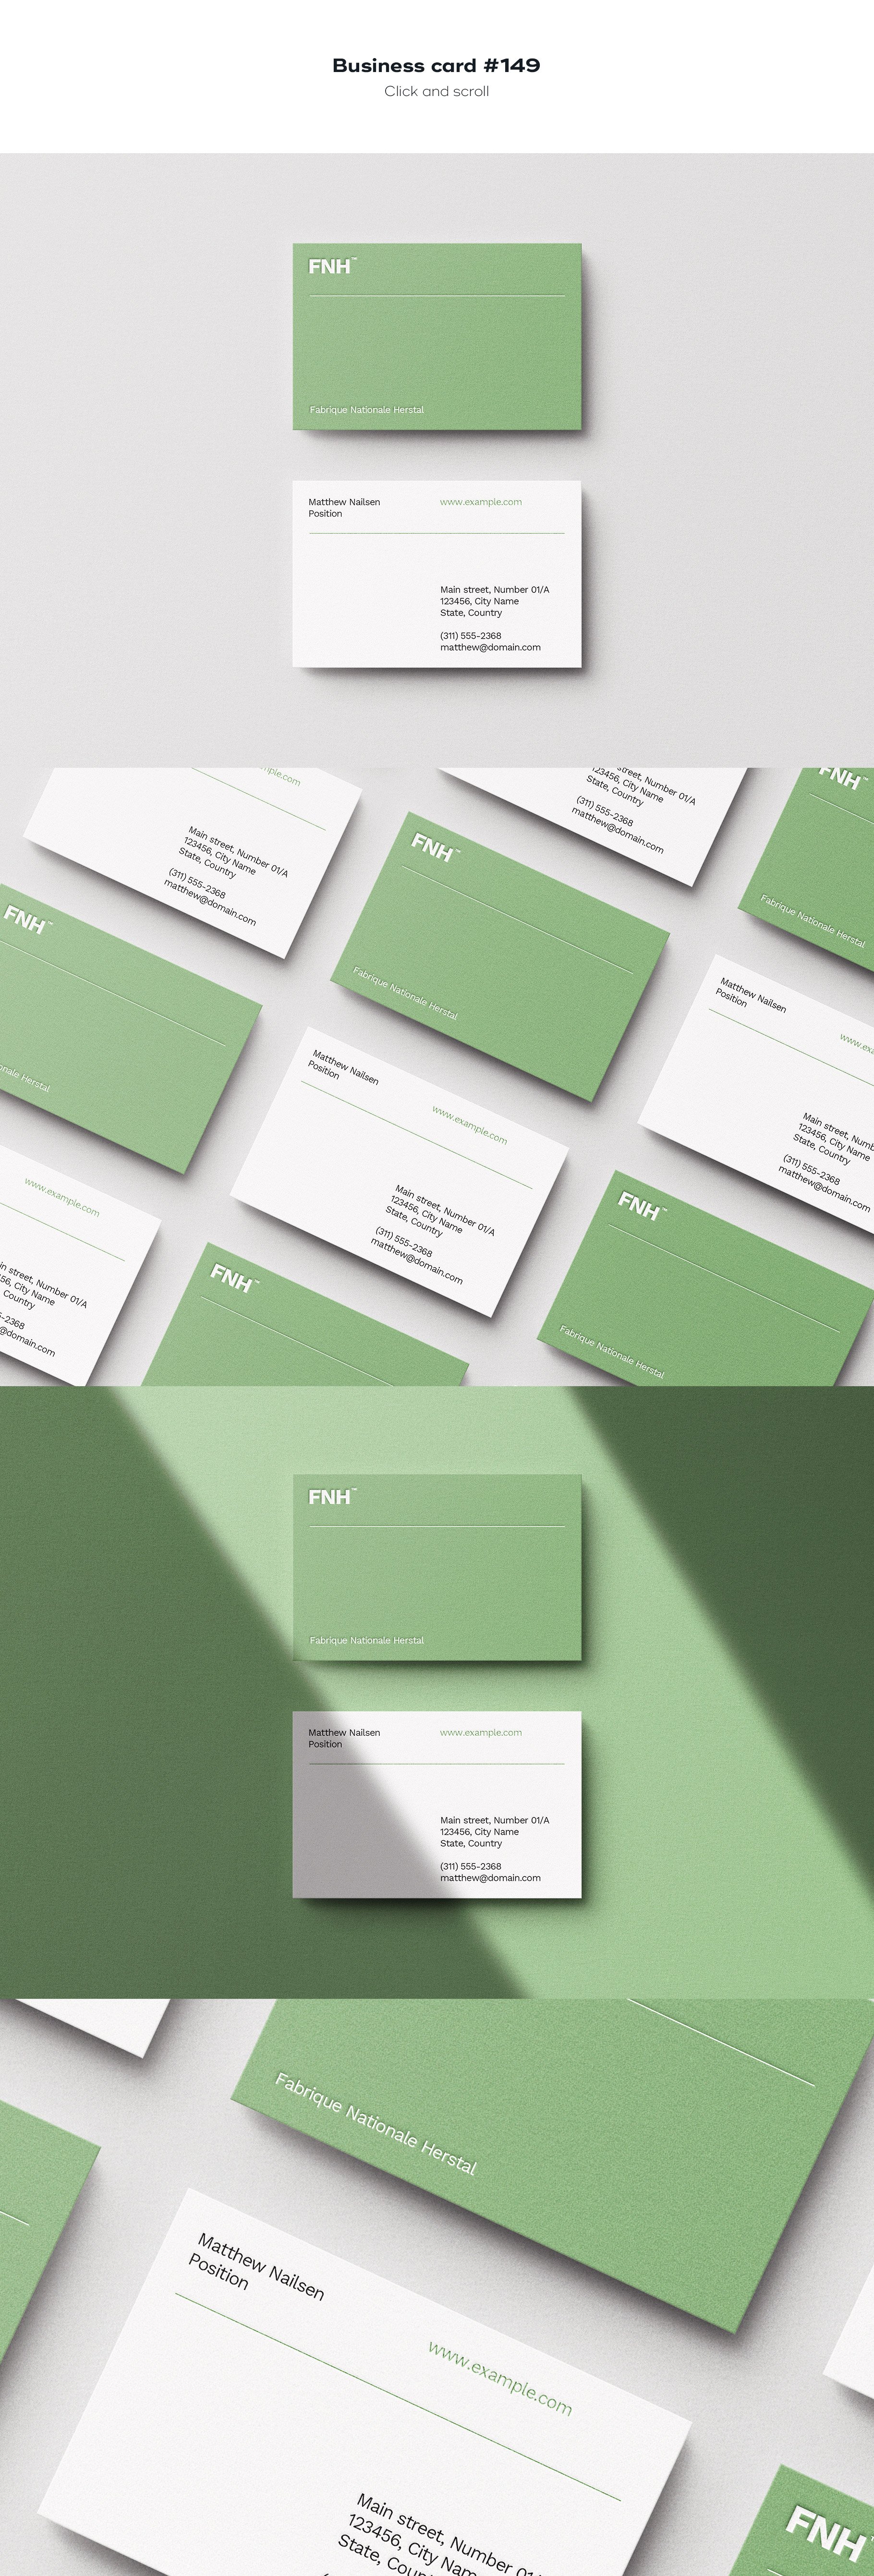 business card 149 183